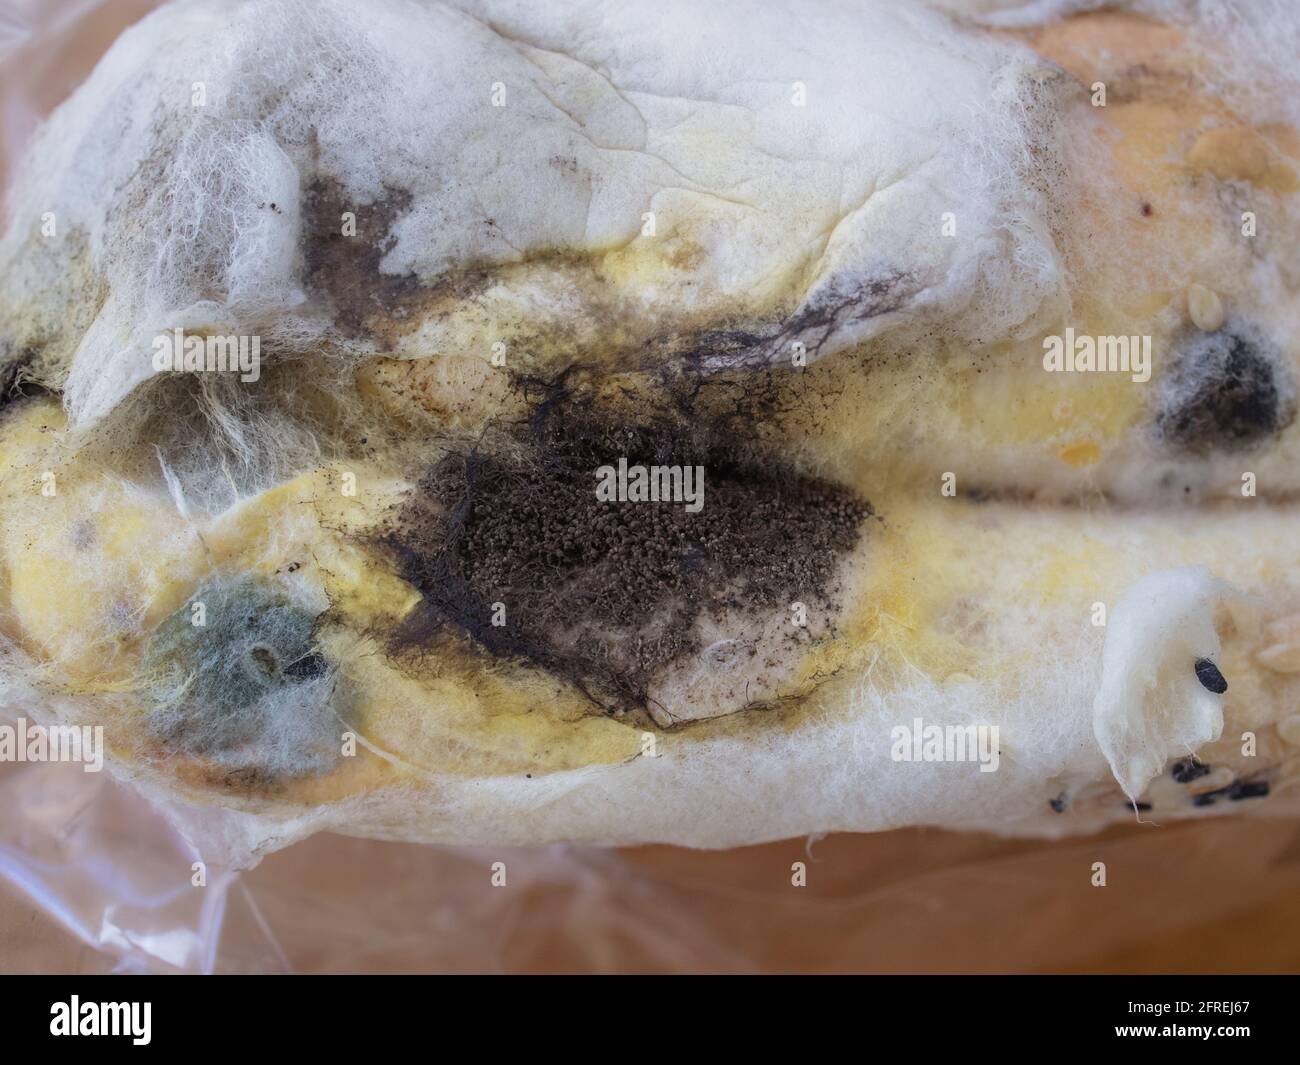 Closeup moldy bun in plastic pack, isolated bread with moldy, fungi texture Stock Photo